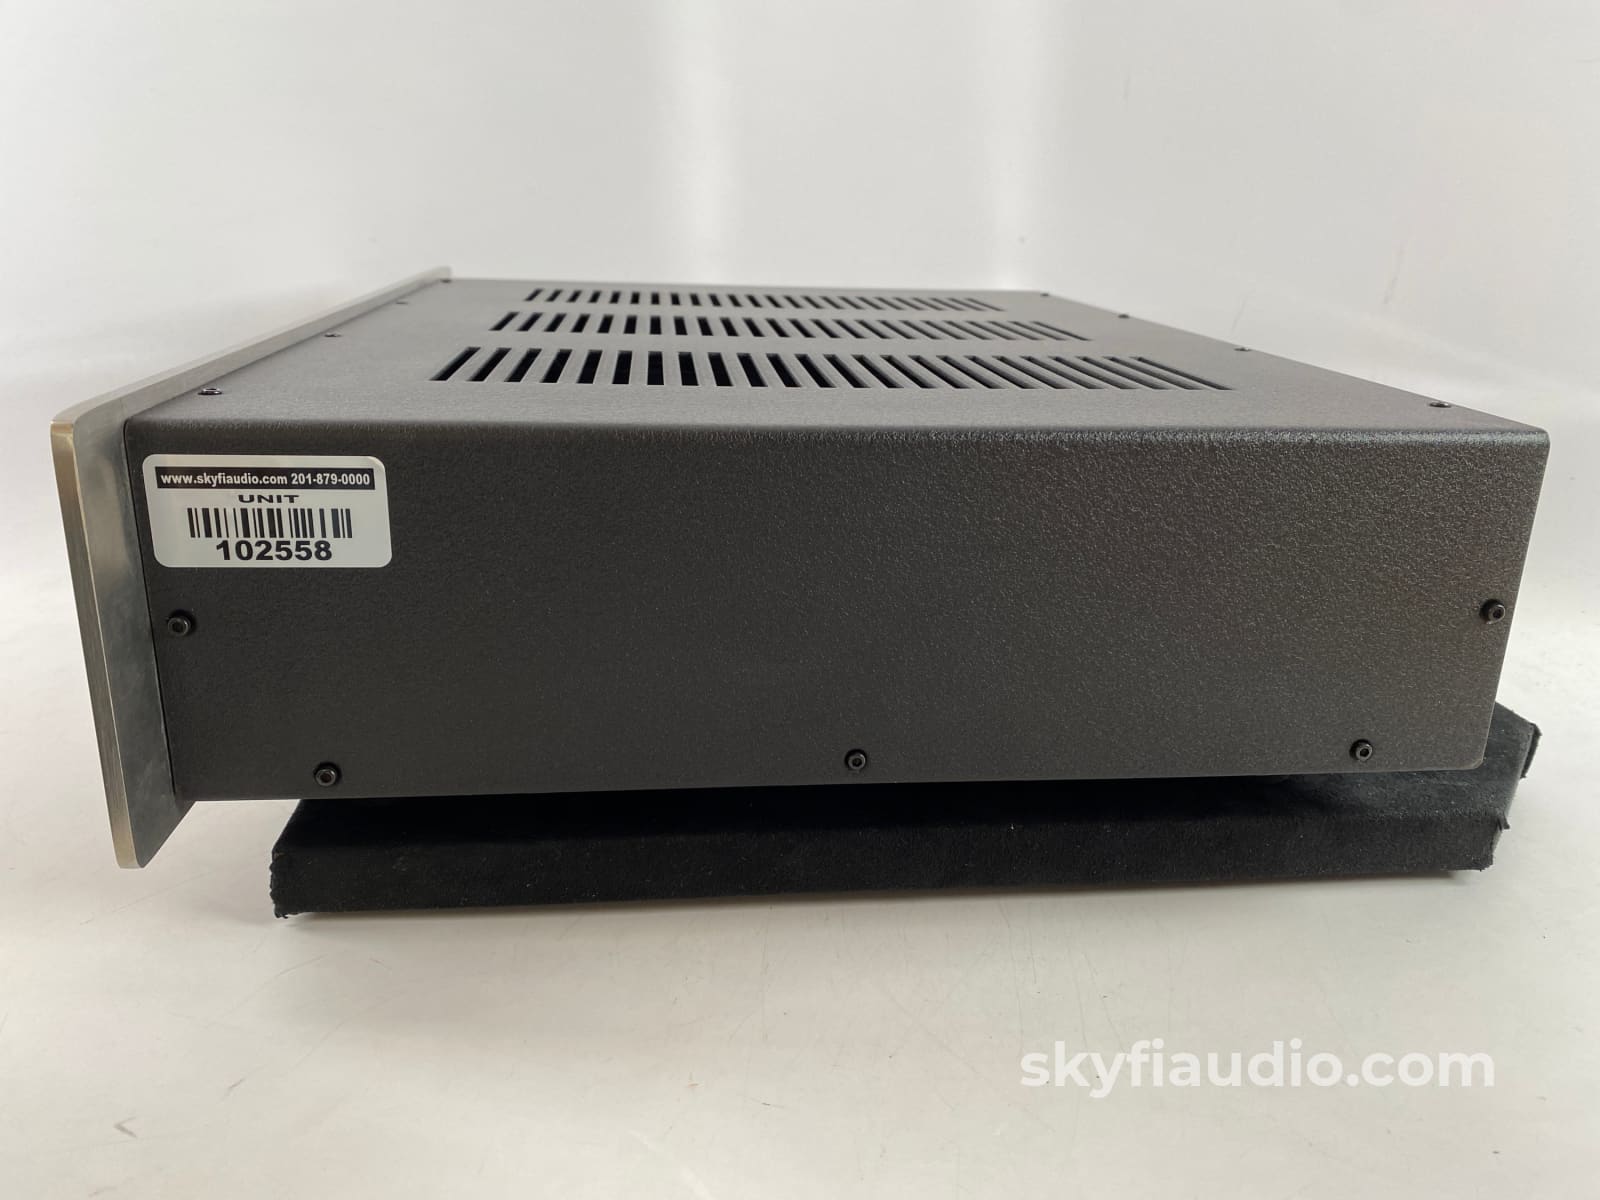 Sonic Frontiers Sfd-2 Mkii - Vintage Tube Dac With Hdcd Skyfi Serviced Cd + Digital